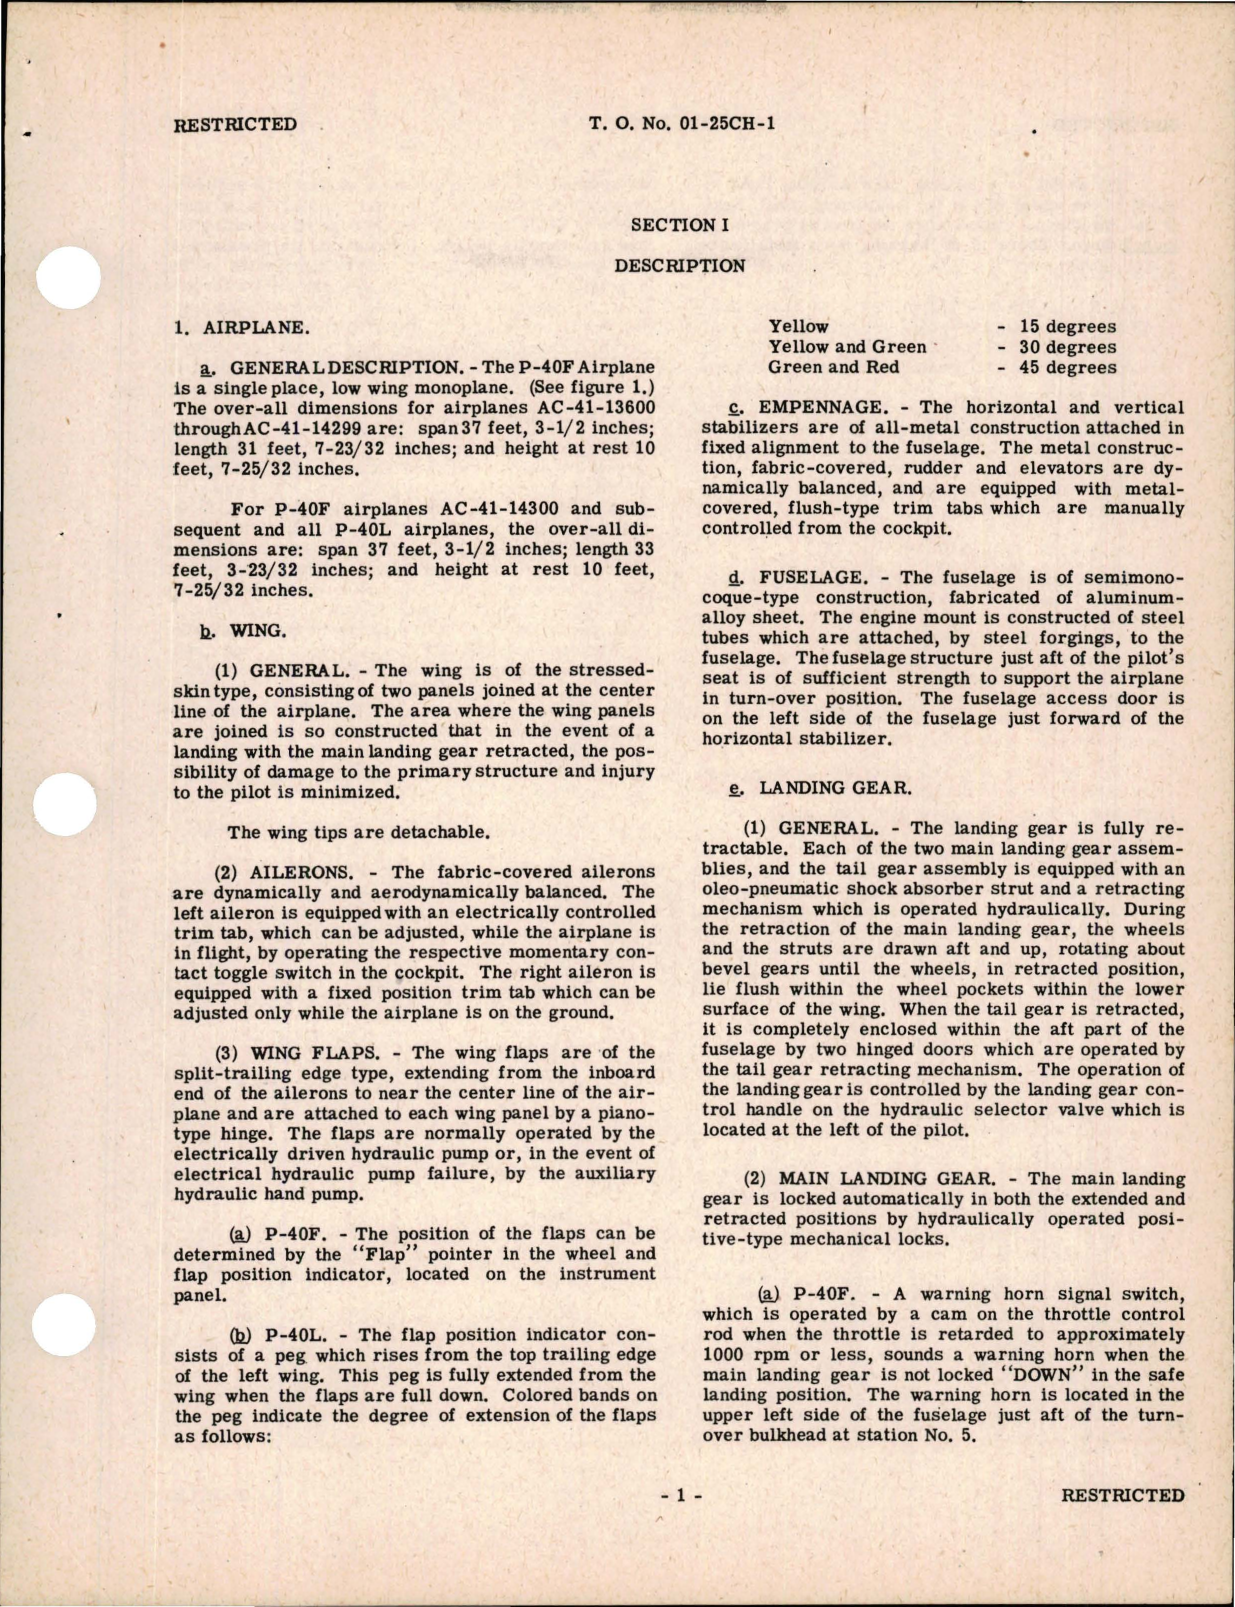 Sample page 7 from AirCorps Library document: Pilot's Flight Operating Instructions for P-40F and P-40L